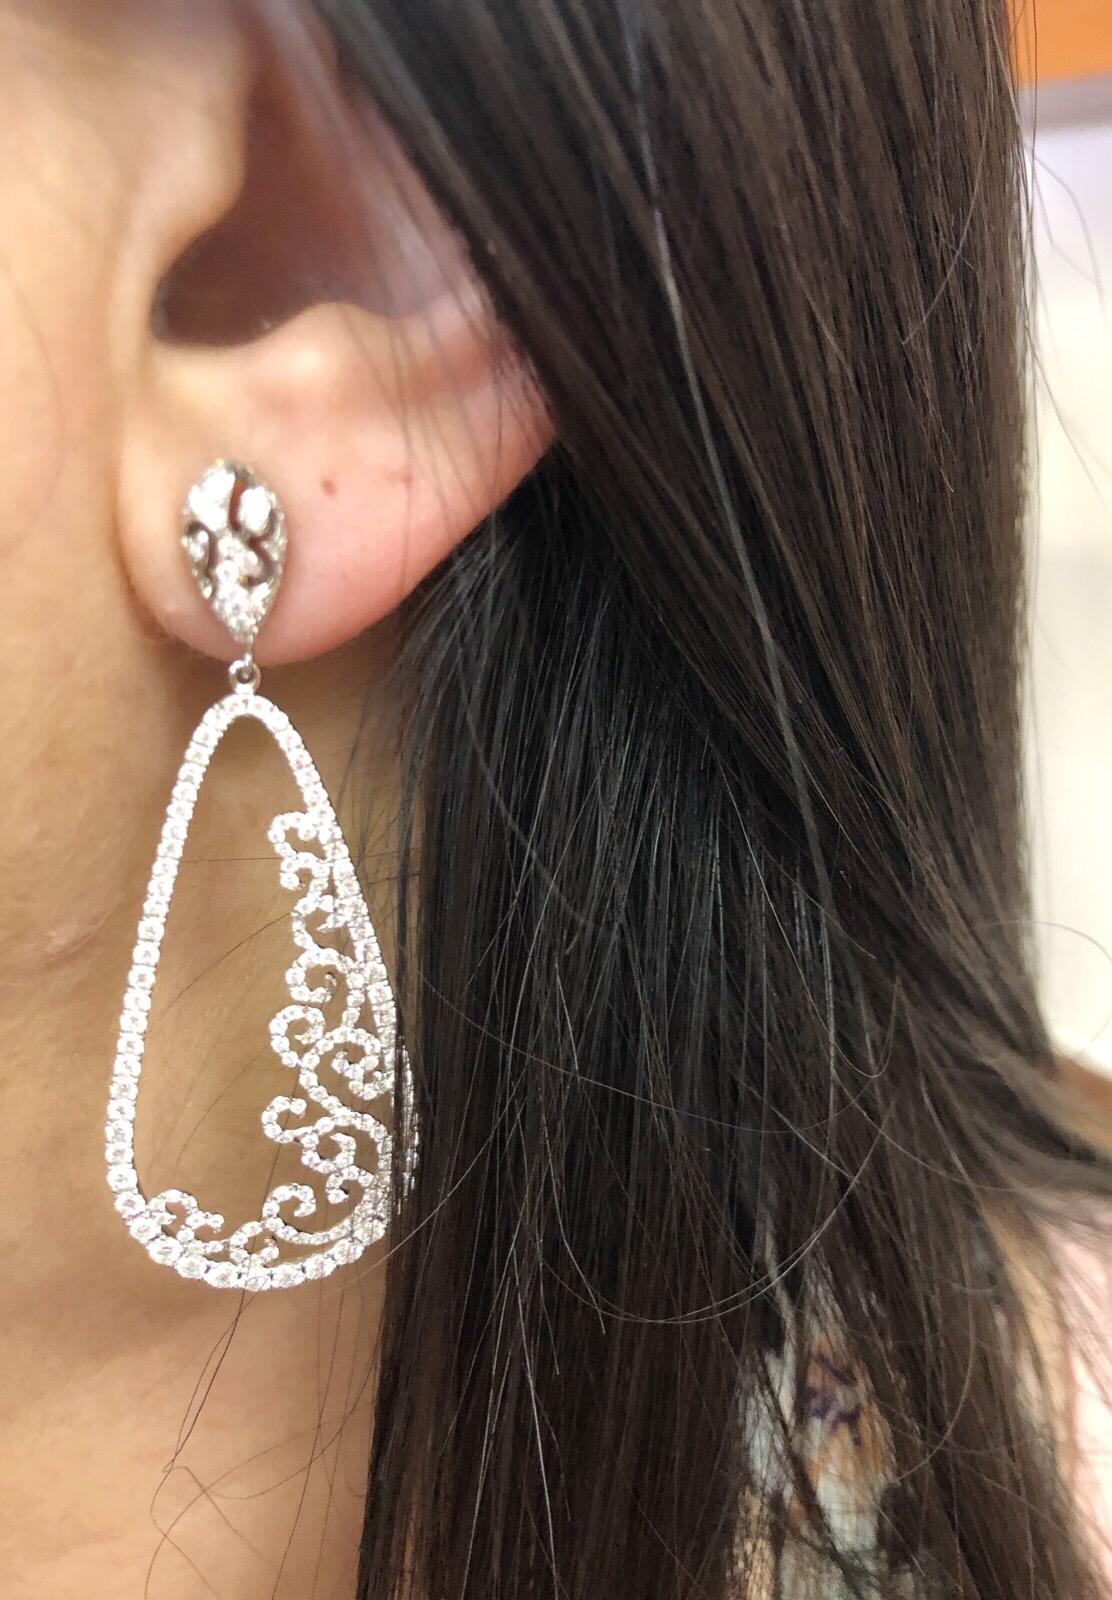 3.88 Carats total weight of round brilliant prong-set diamonds set in 18K white gold drop scrolled earrings in a tear drop shape. Diamond quality: F-H color, VS2-SI1 clarity.